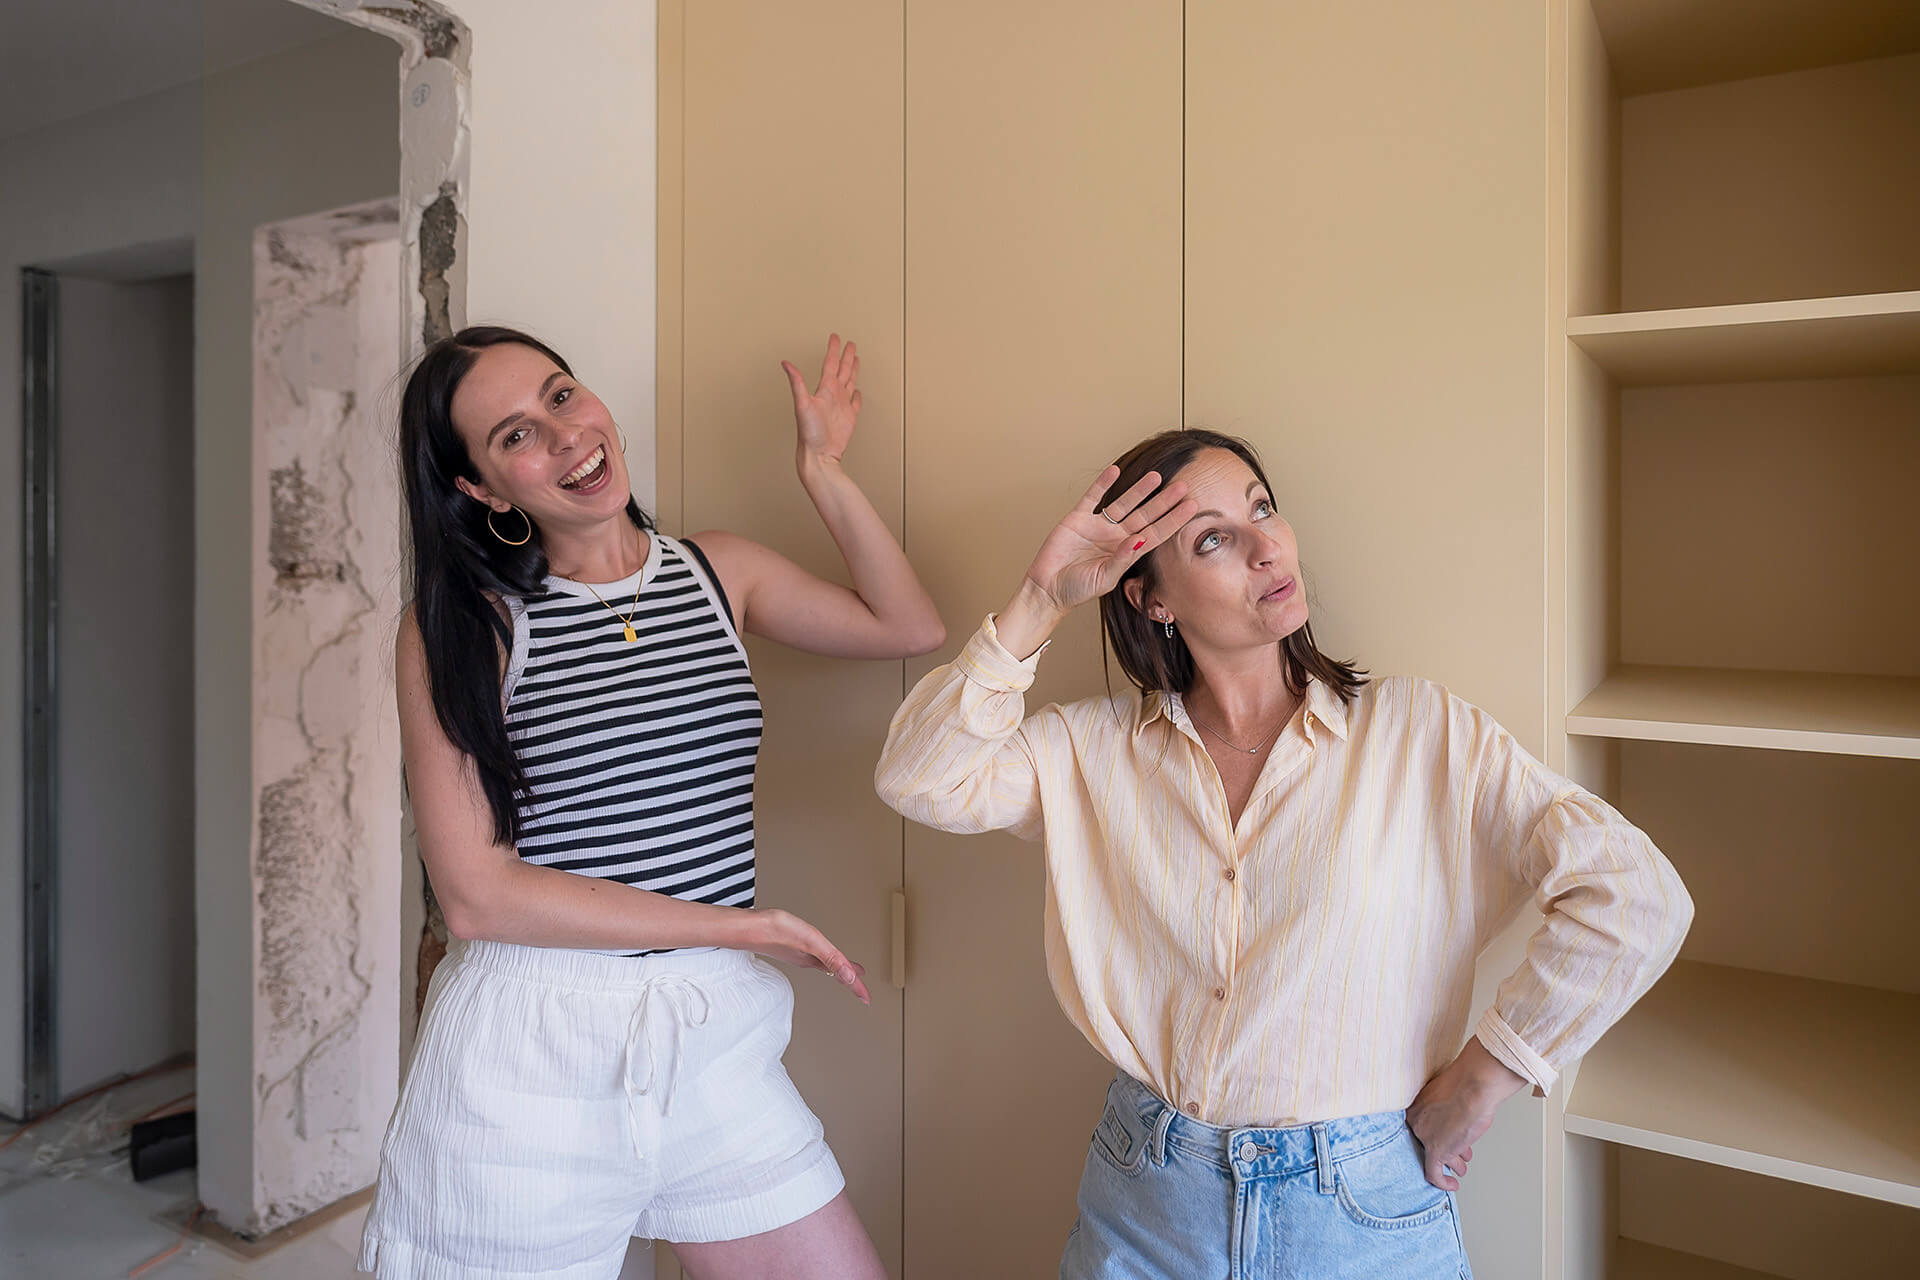 Eline and Zara proudly stand in front of the bespoke wardrobe they installed themselves